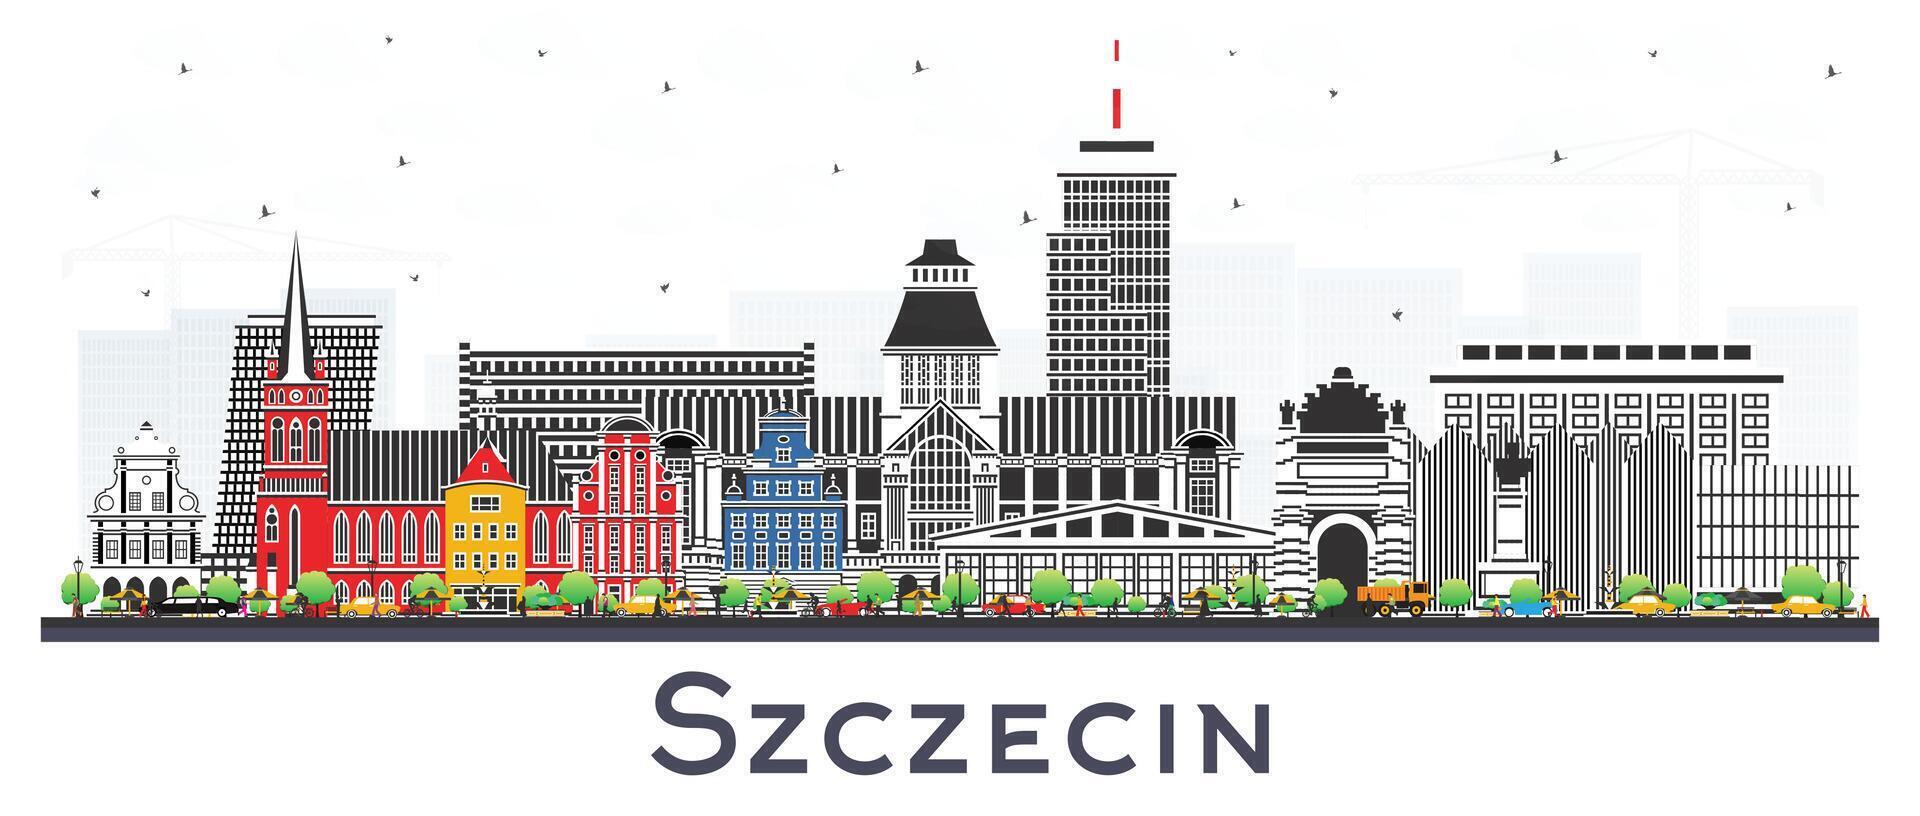 Szczecin Poland city skyline with color buildings isolated on white. Szczecin cityscape with landmarks. Business travel and tourism concept with modern and historic architecture. vector